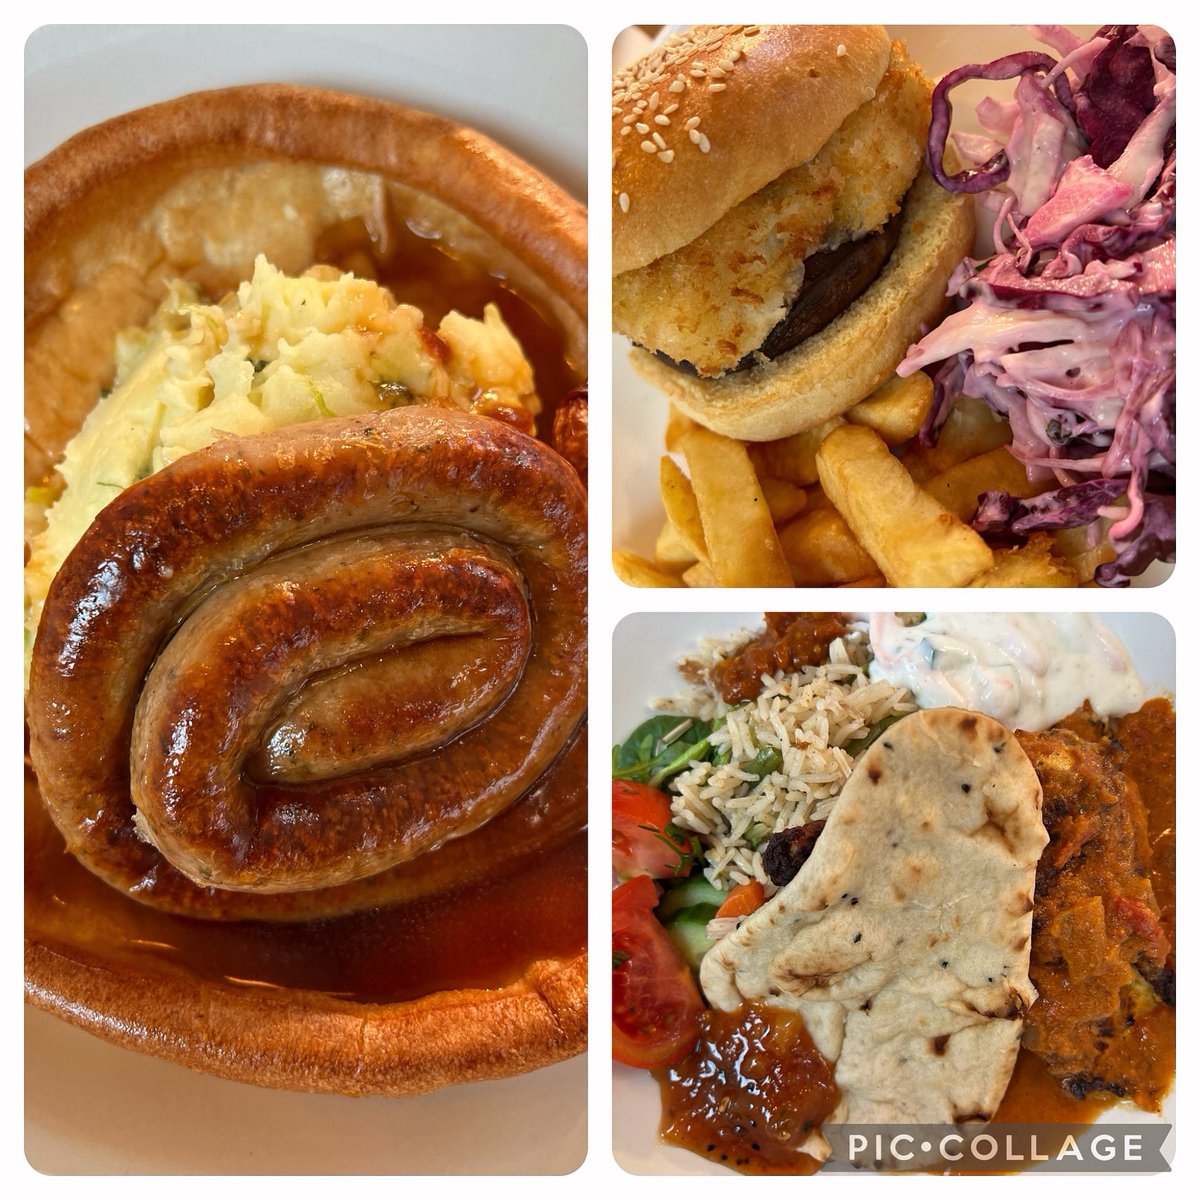 On todays menu in the EDUkitchen at St Peter’s we are serving: -Cumberland sausage ring -Butter Chicken Curry -Halloumi and Mushroom Burger @LoveBritishFood #greathospitalfood